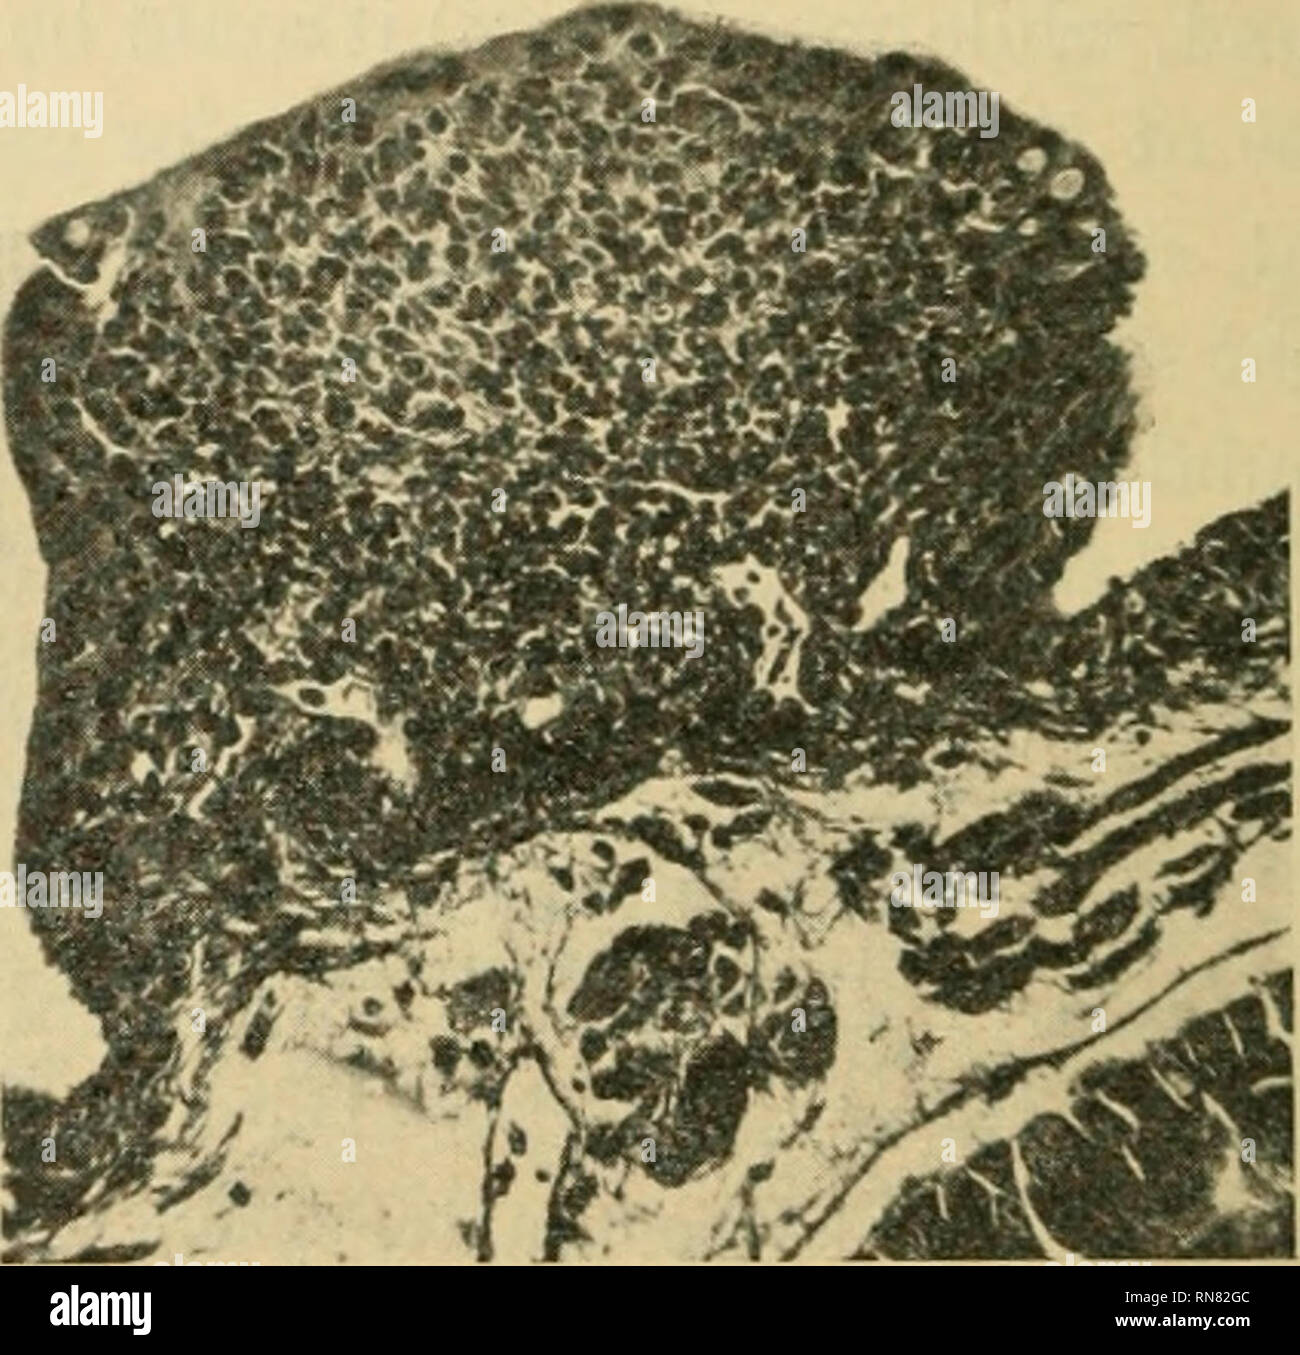 . Anatomischer Anzeiger. Anatomy, Comparative; Anatomy, Comparative. Fig. 3. Eig. 4. Fig. 3. Sublingual tonsil. Salamandra atra. Drawing from a vertical section, to show the cells in the epithelium, connective tissue, blood-vessels, etc. V. vein. Fig. 4. Sublingual Tonsil. Salamandra atra. Photograph, x 90, to show the structure and relations. of a sublingual tonsil and photographs of a sublingual and a preglotti- deal tonsil, figures 1, 2 and 3. Figure 6 shows a small nest of round cells in the epithelium. It is quite possible that through structures in the epithelium of this character, a con Stock Photo